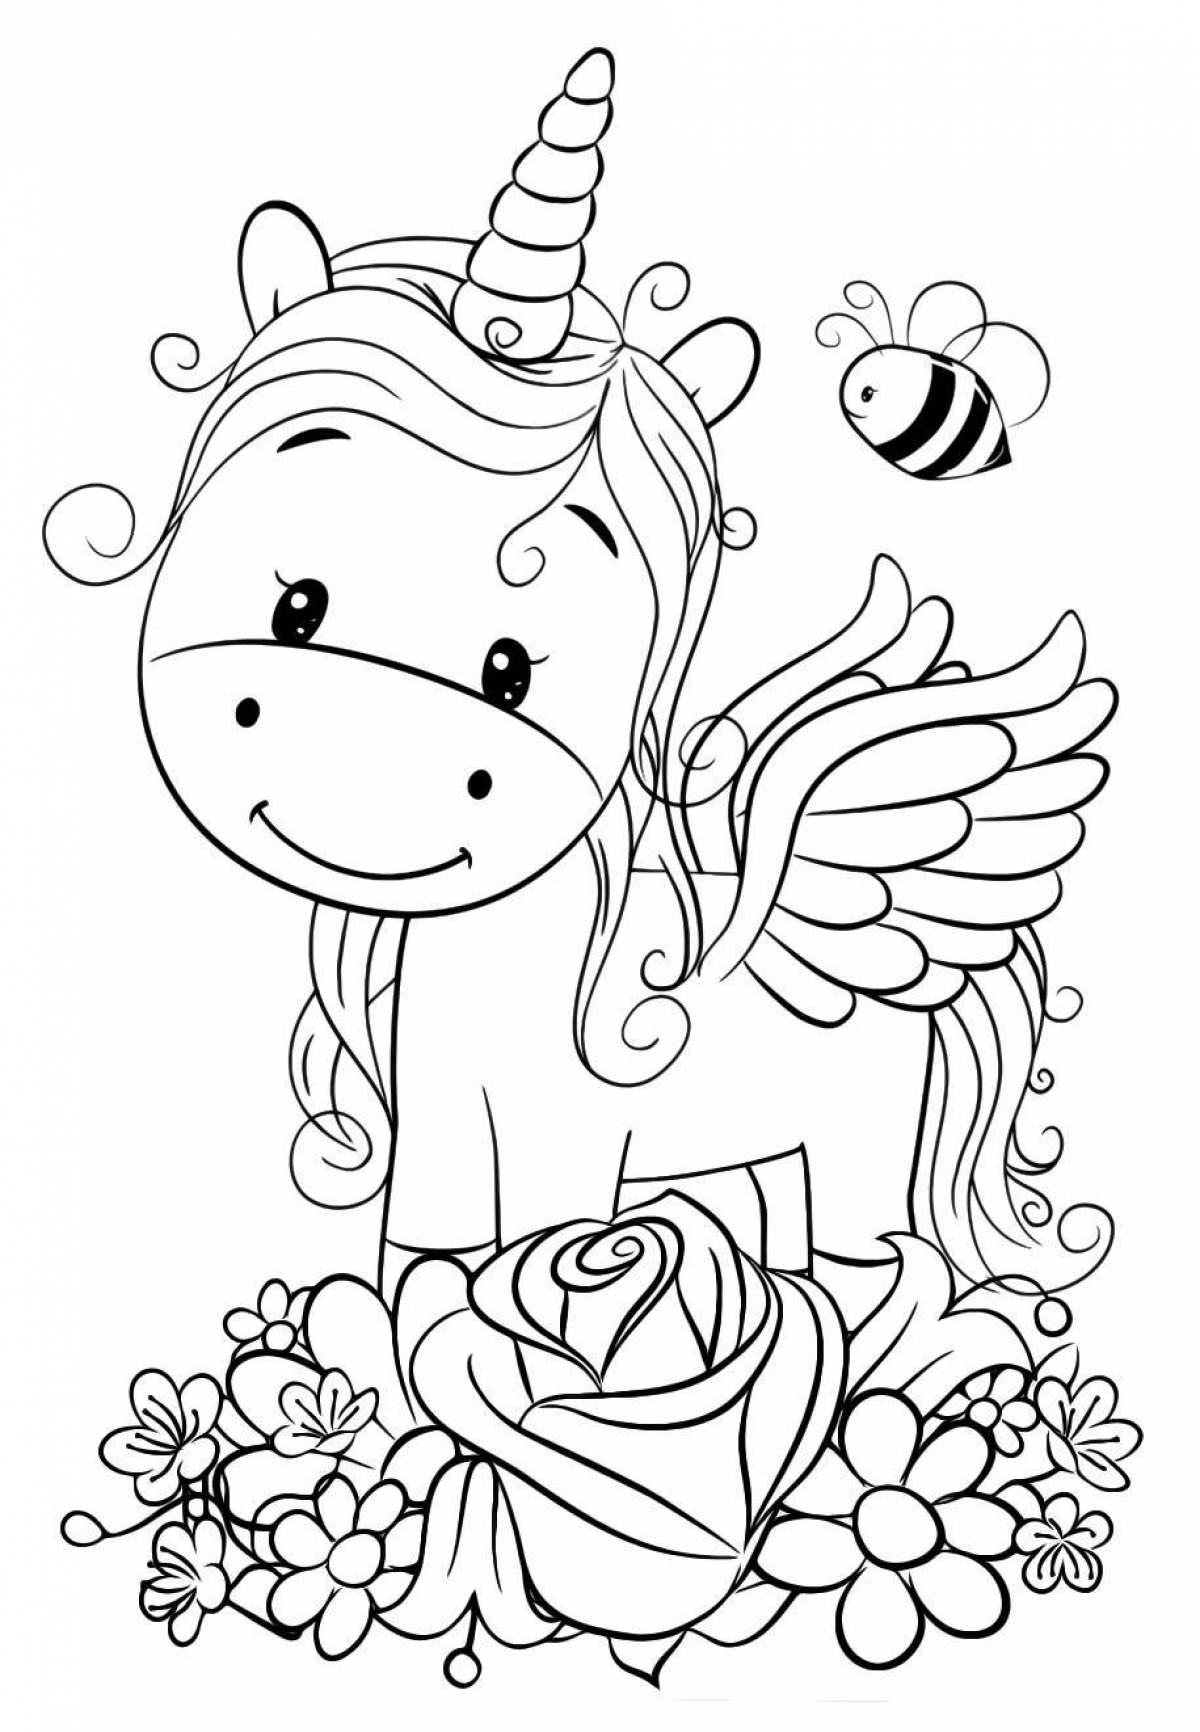 Fun coloring for children 5-6 years old for girls unicorns